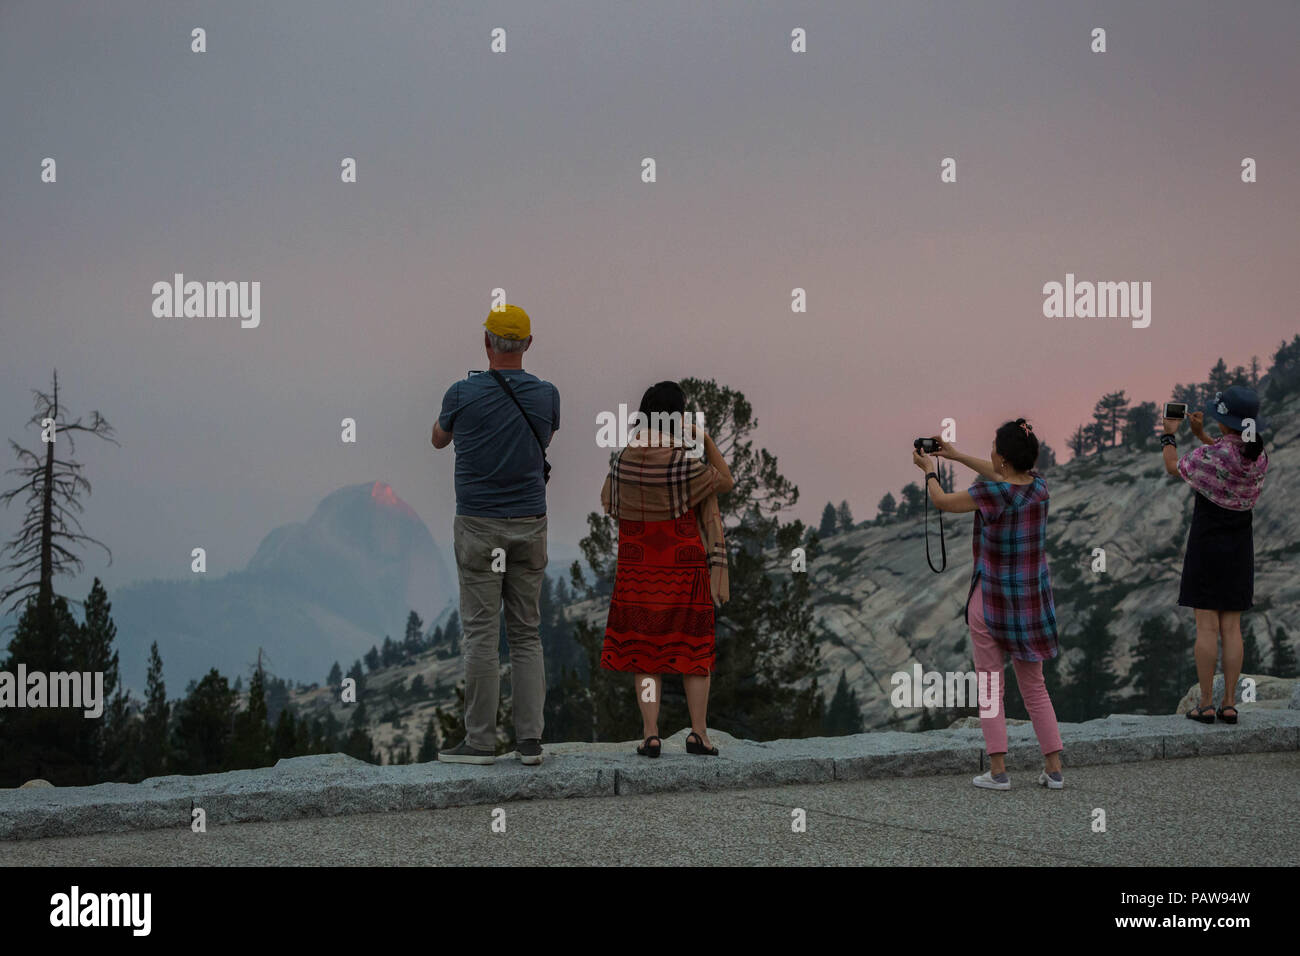 Yosemite National Park, California, USA. 24th July, 2018. Tuesday, July 24, 2018.Yosemite National Park visitors take photos at Olmsted Point along Tioga Pass Road/Highway 120 in the park's high country. Half Dome is seen in the background through the Ferguson Fire smoke. The fire is burning near the park's El Portal entrance. Credit: Tracy Barbutes/ZUMA Wire/Alamy Live News Stock Photo